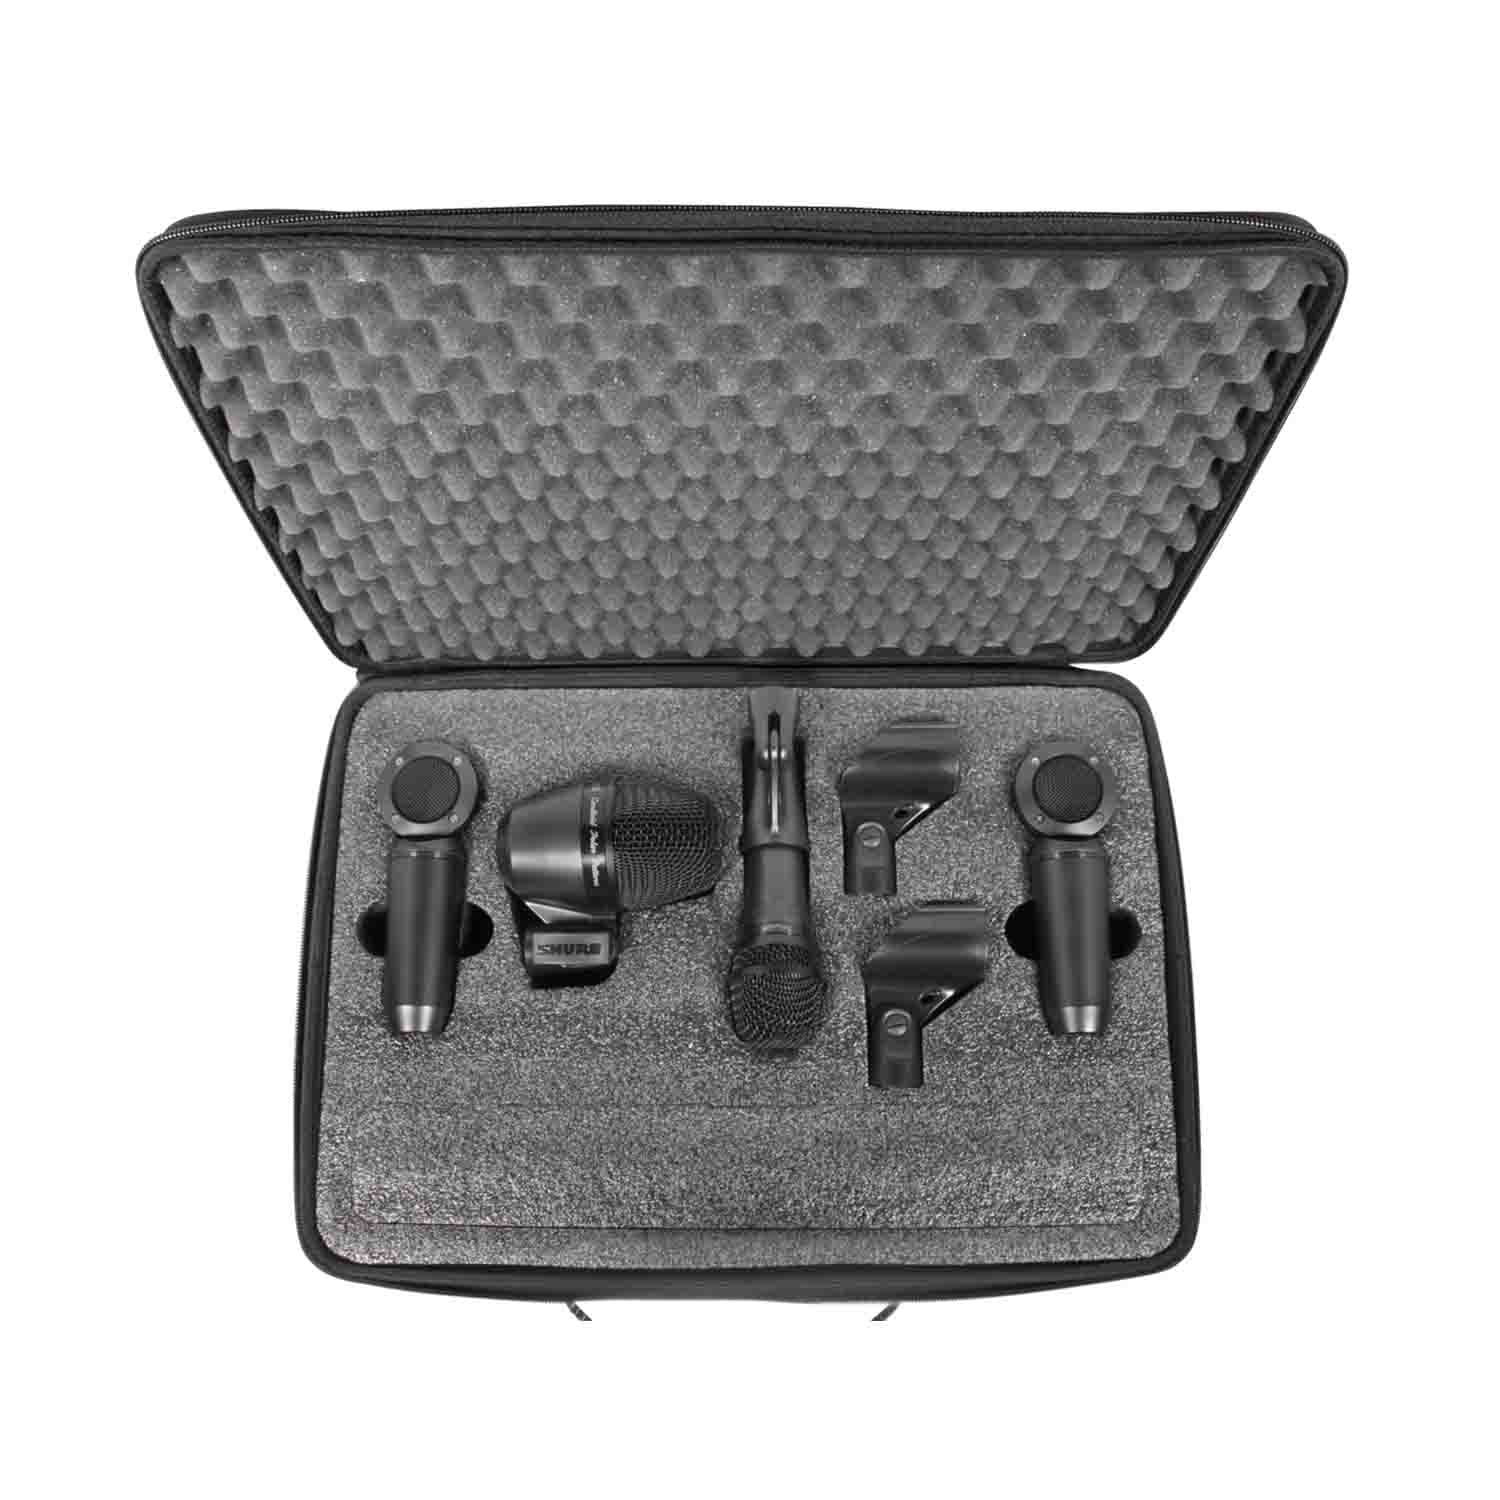 Shure PGA Studio Kit 4 Microphone Package with Clips Cables and Case | Open Box Shure